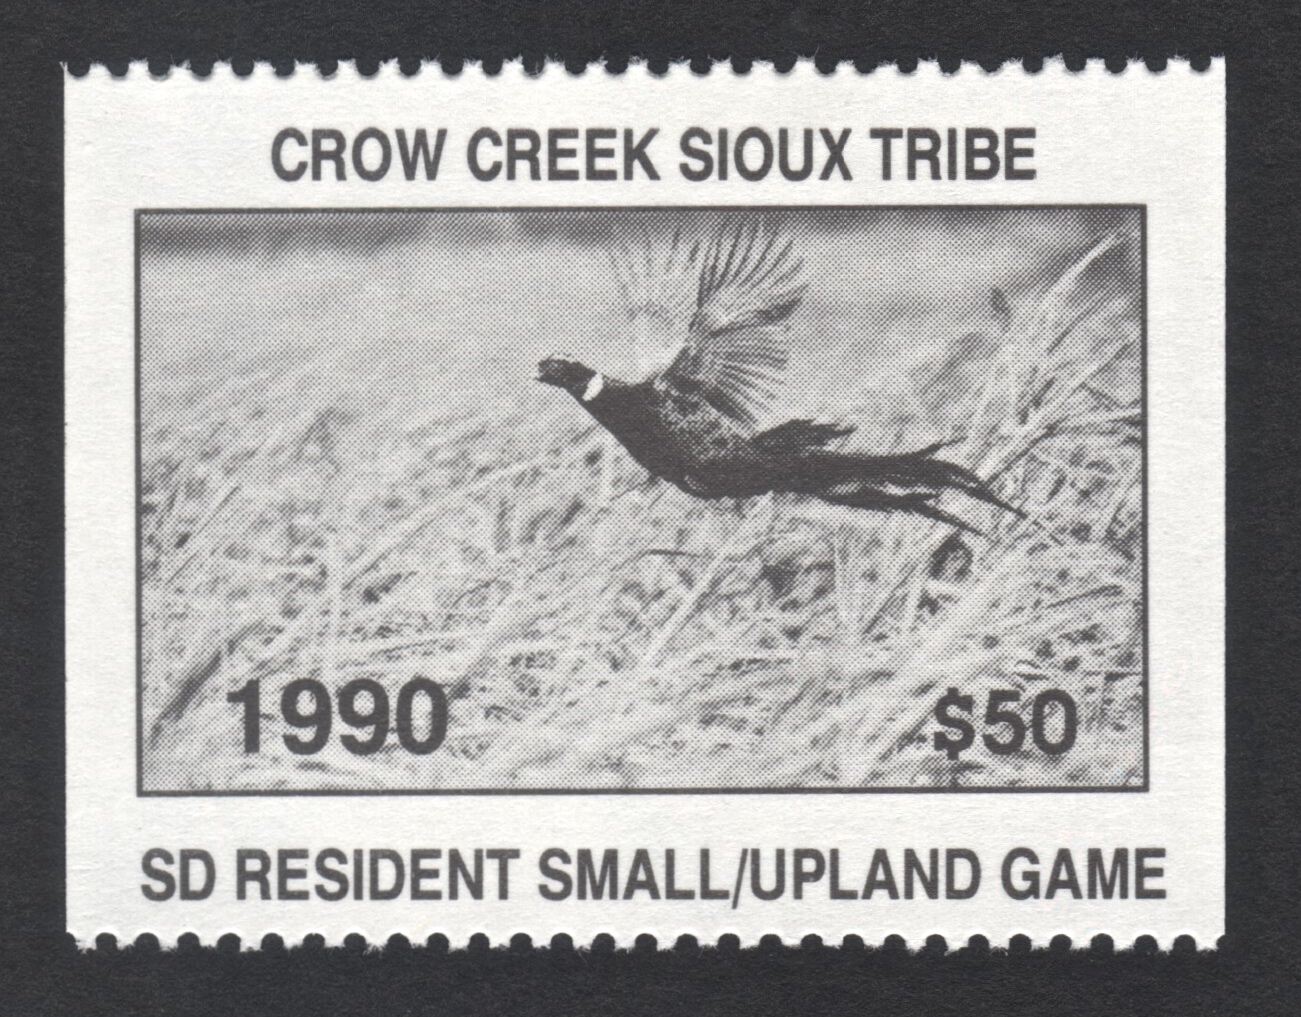 1990 Error Crow Creek Resident Small/Upland Game Missing Serial Number